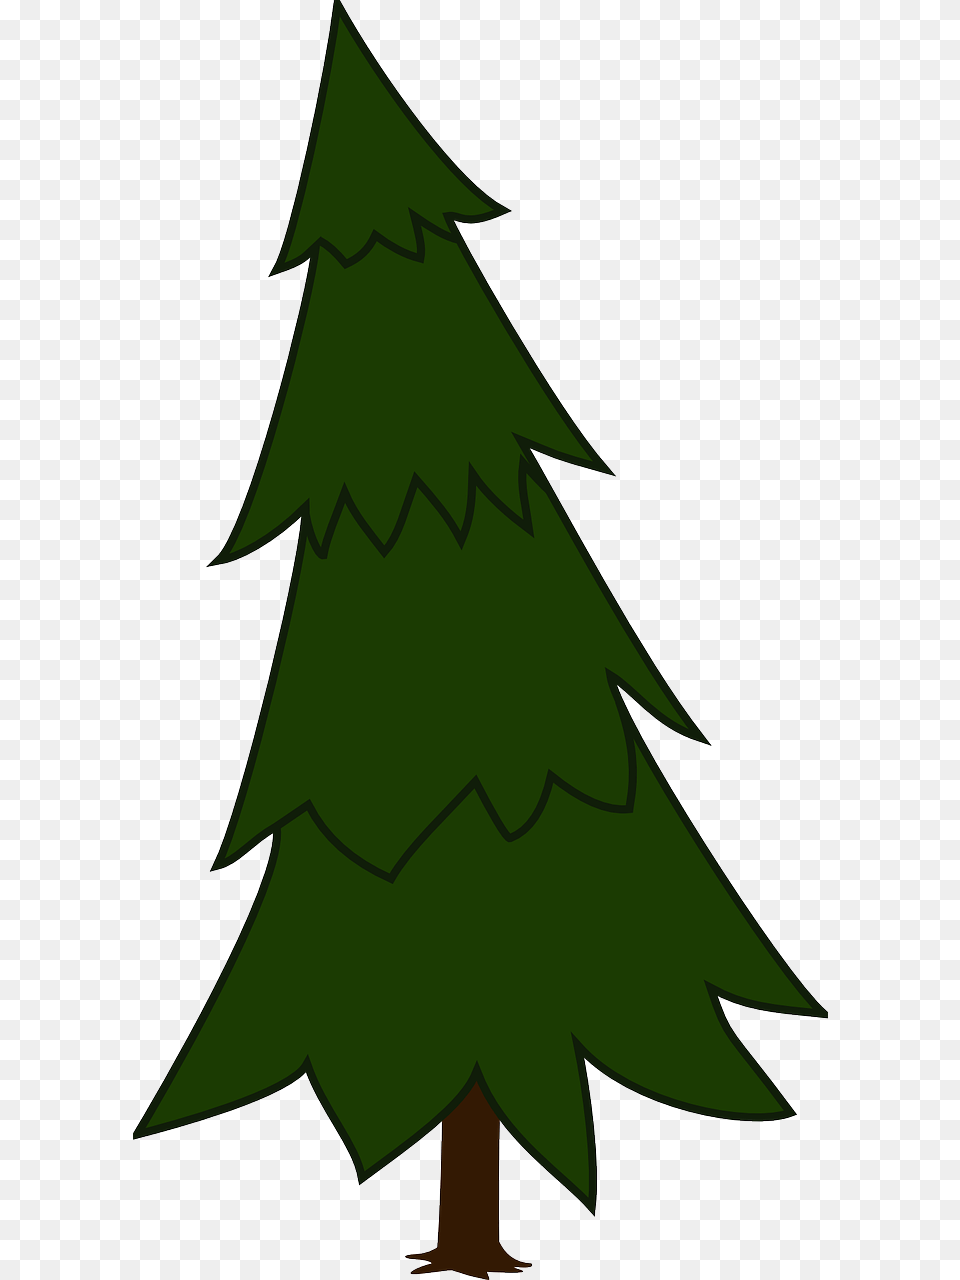 Spruce Tree Clip Art Tree Clipart Pine, Plant, Fir, Green, Animal Png